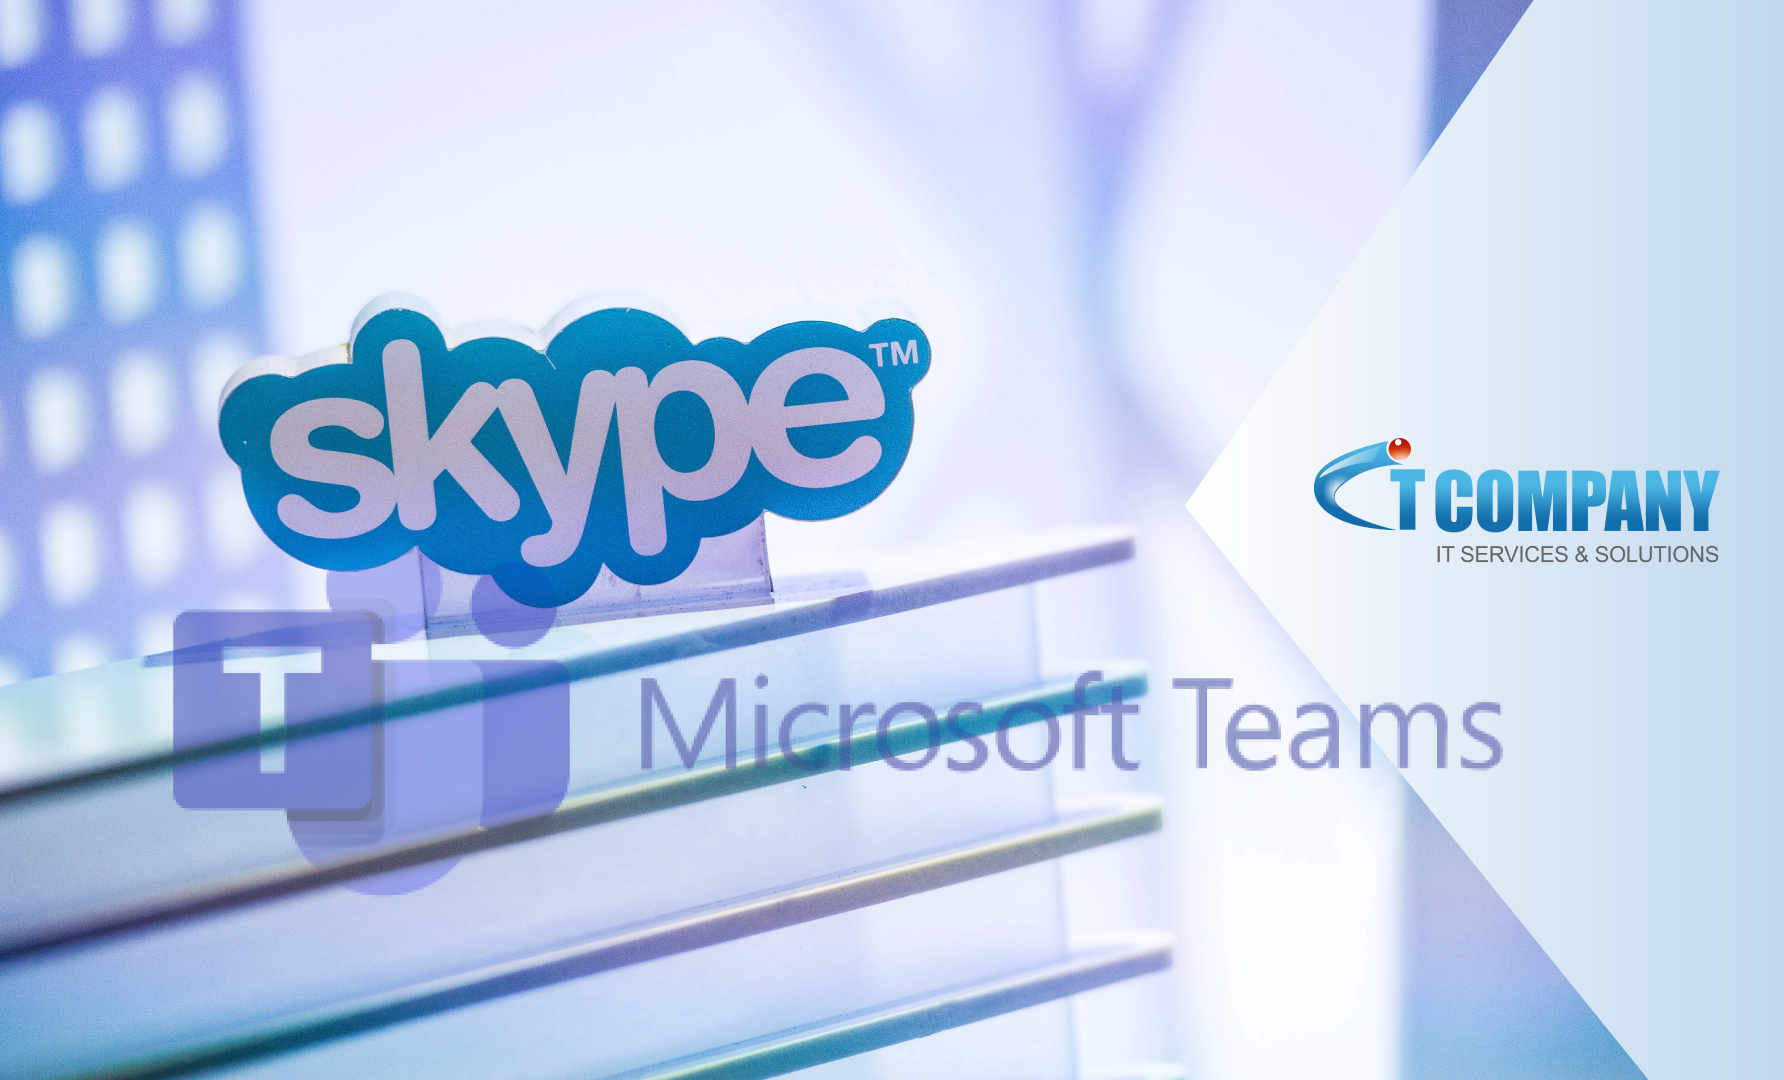 Skype is getting a lot of new features soon